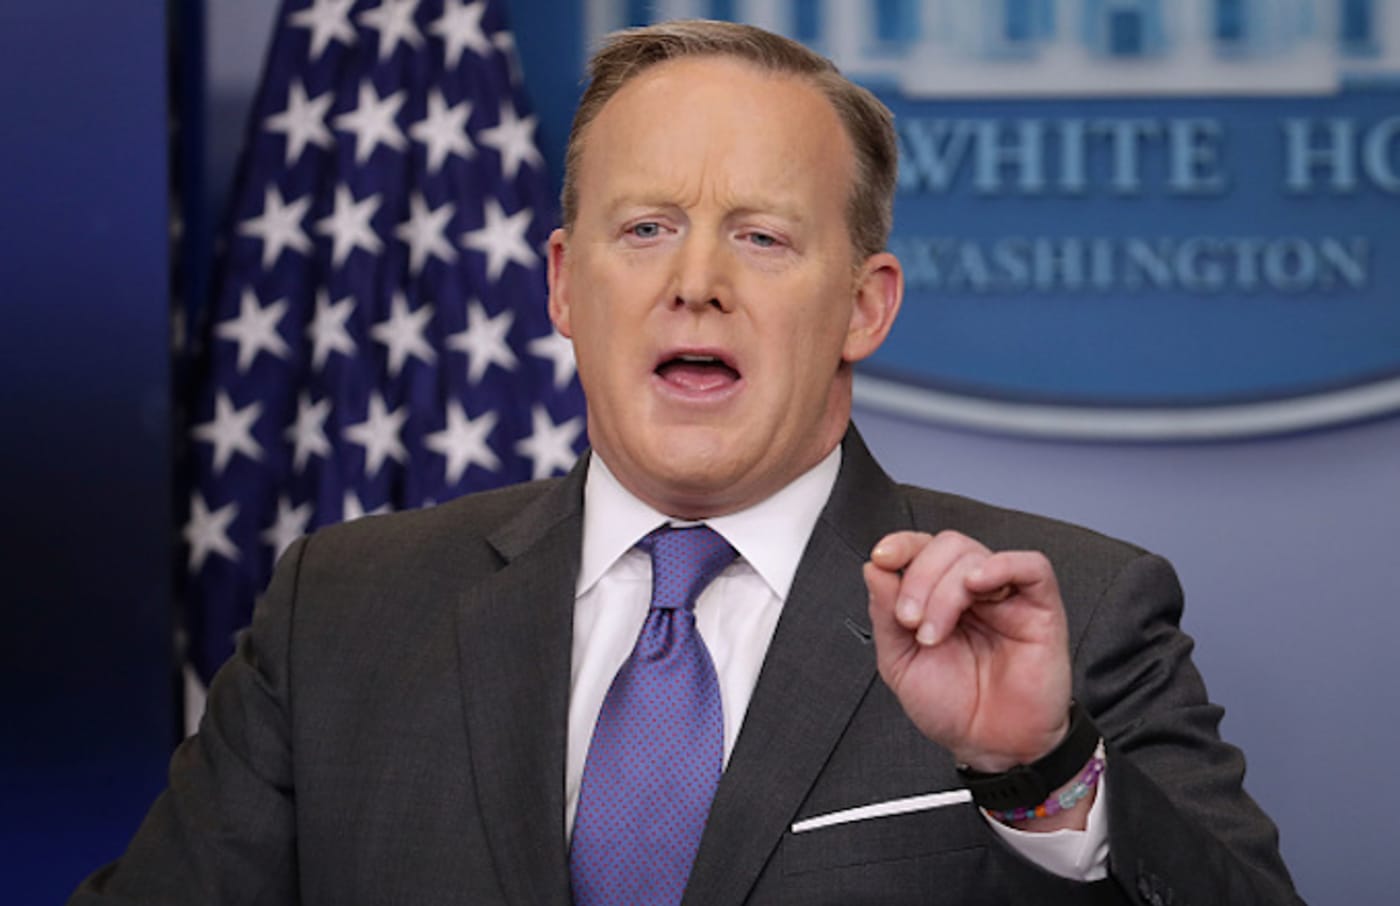 White House Press Secretary Sean Spicer reacts to reporters' questions